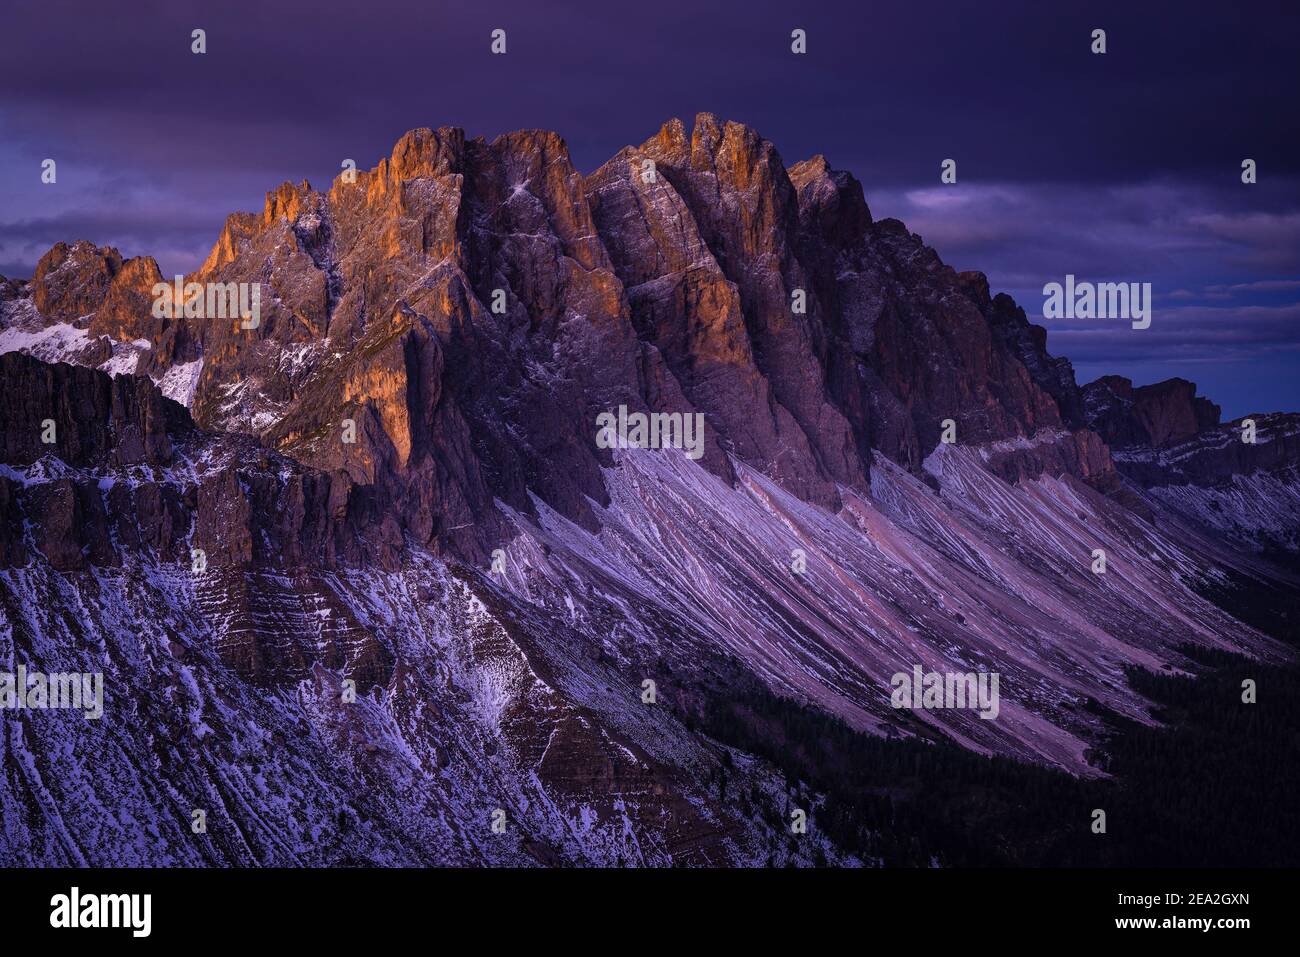 The snowy rock faces and cliffs of the Geisler peaks of the Puez-Odle mountains glow at dawn, Dolomites, South Tyrol, Italy Stock Photo